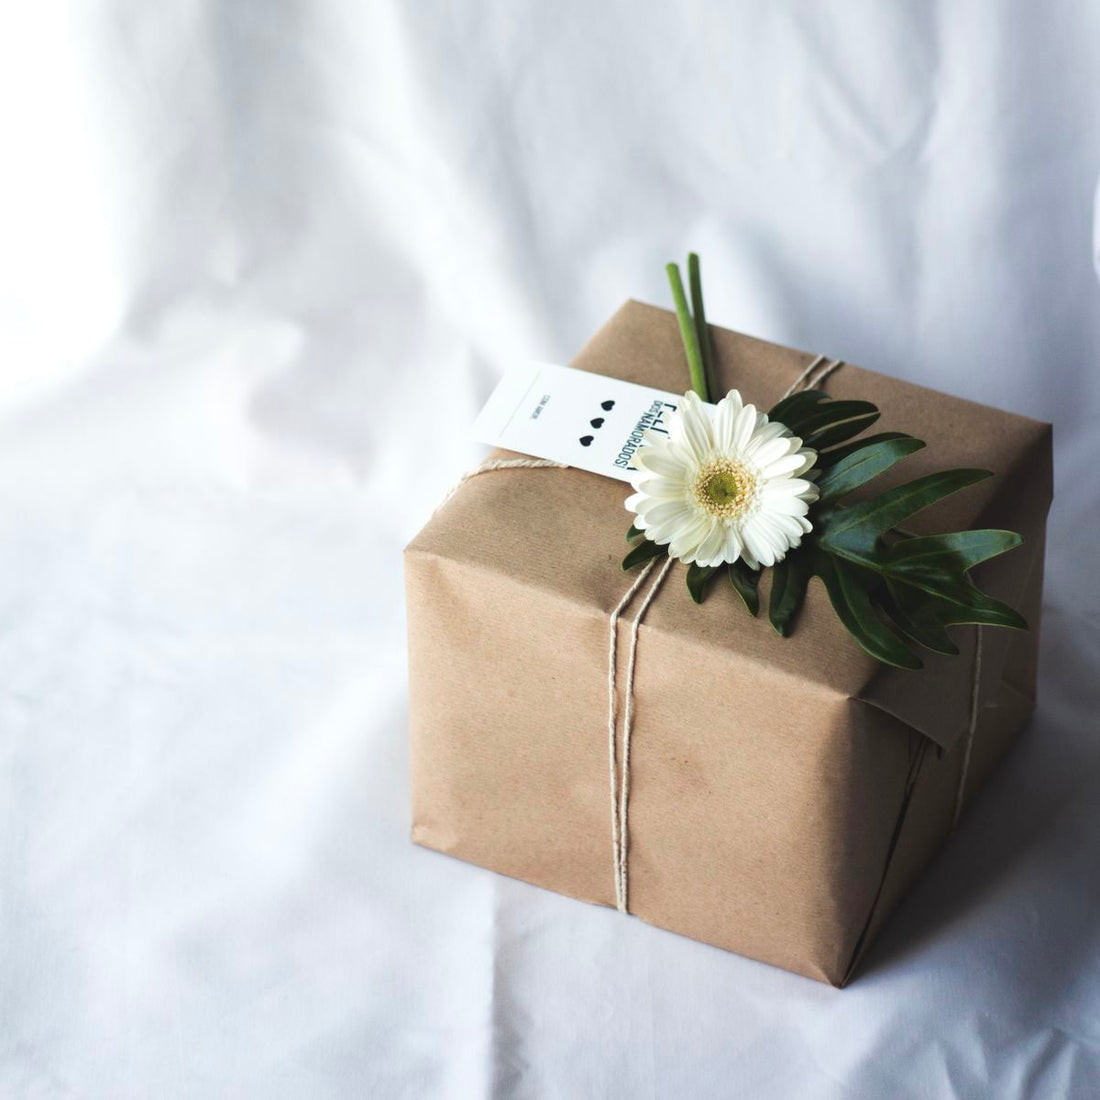 A brown paper wrapped present with a white ribbon tied around it. A daisy is placed on top of the ribbon for decoration.